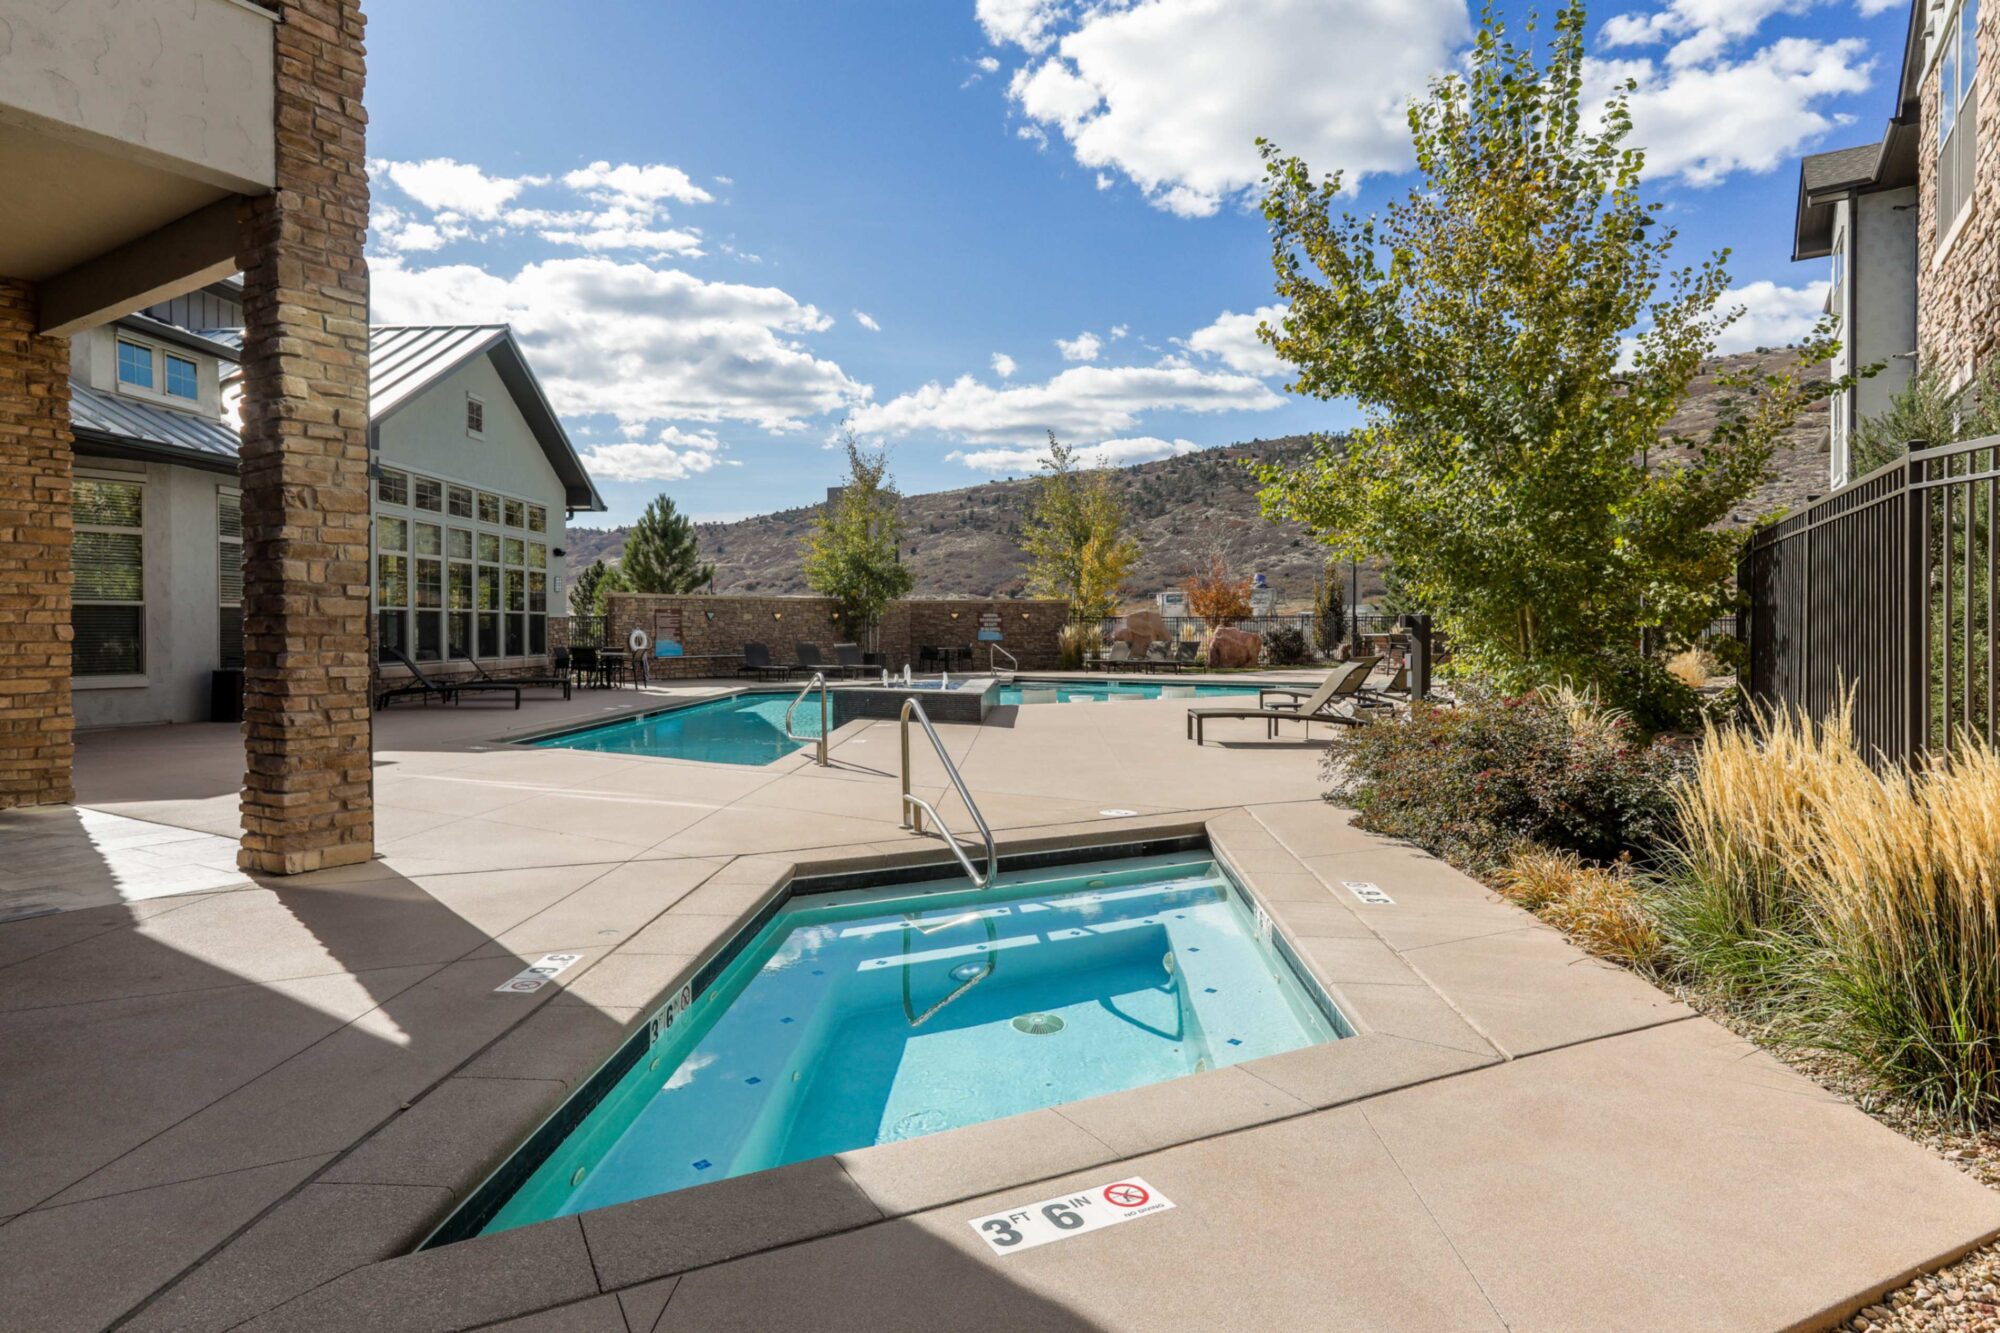 Pool and spa with deck seating and mountain views.